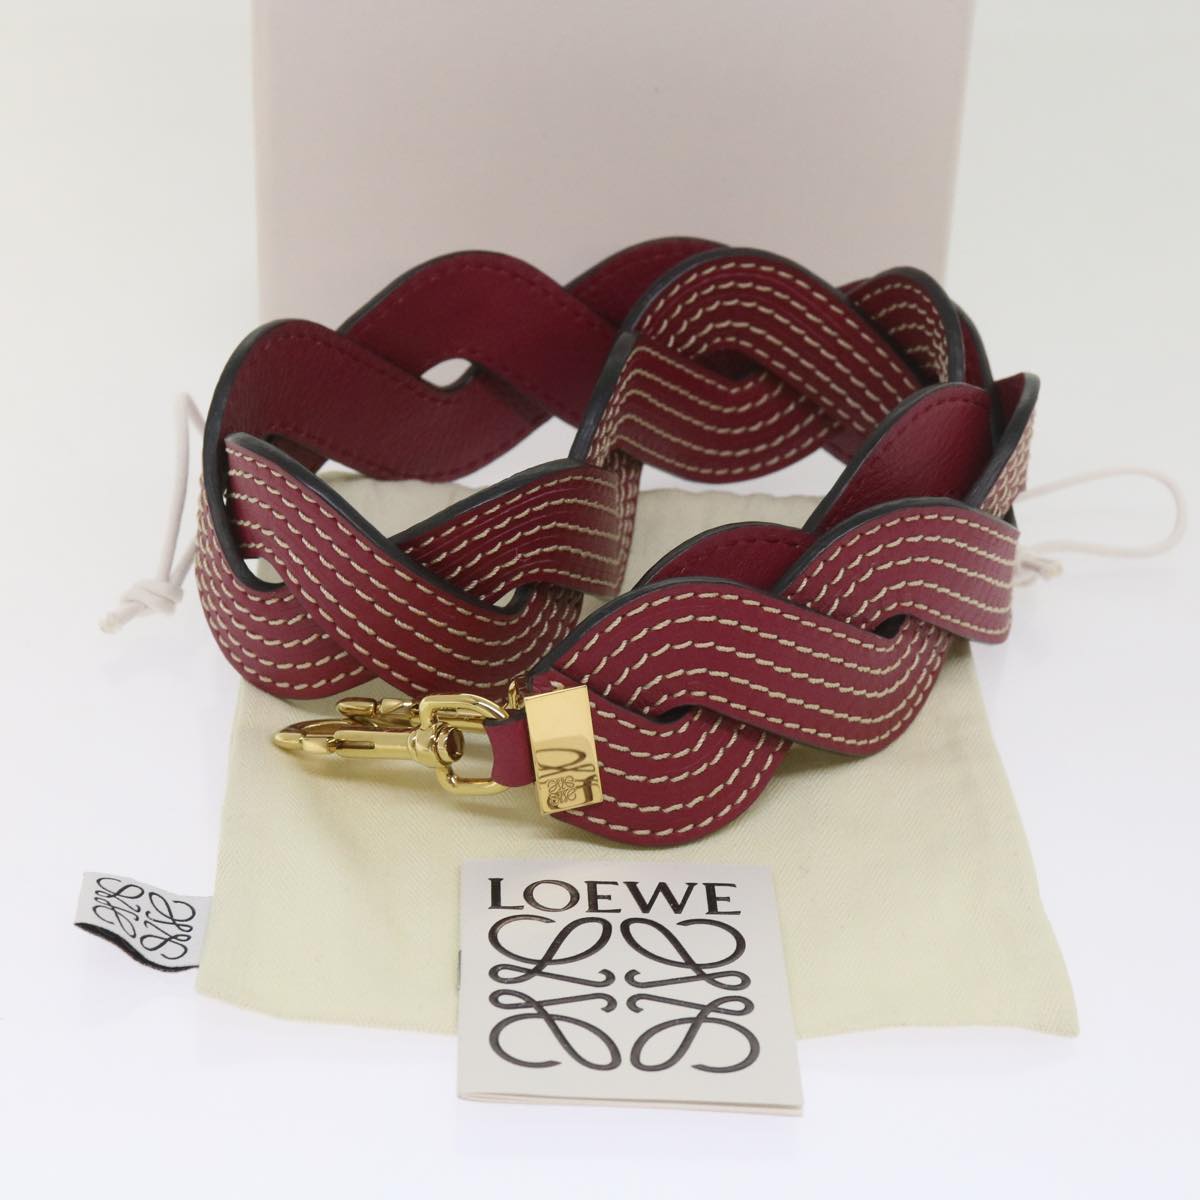 LOEWE Shoulder Strap Leather 31.5"" Red Auth 65276A